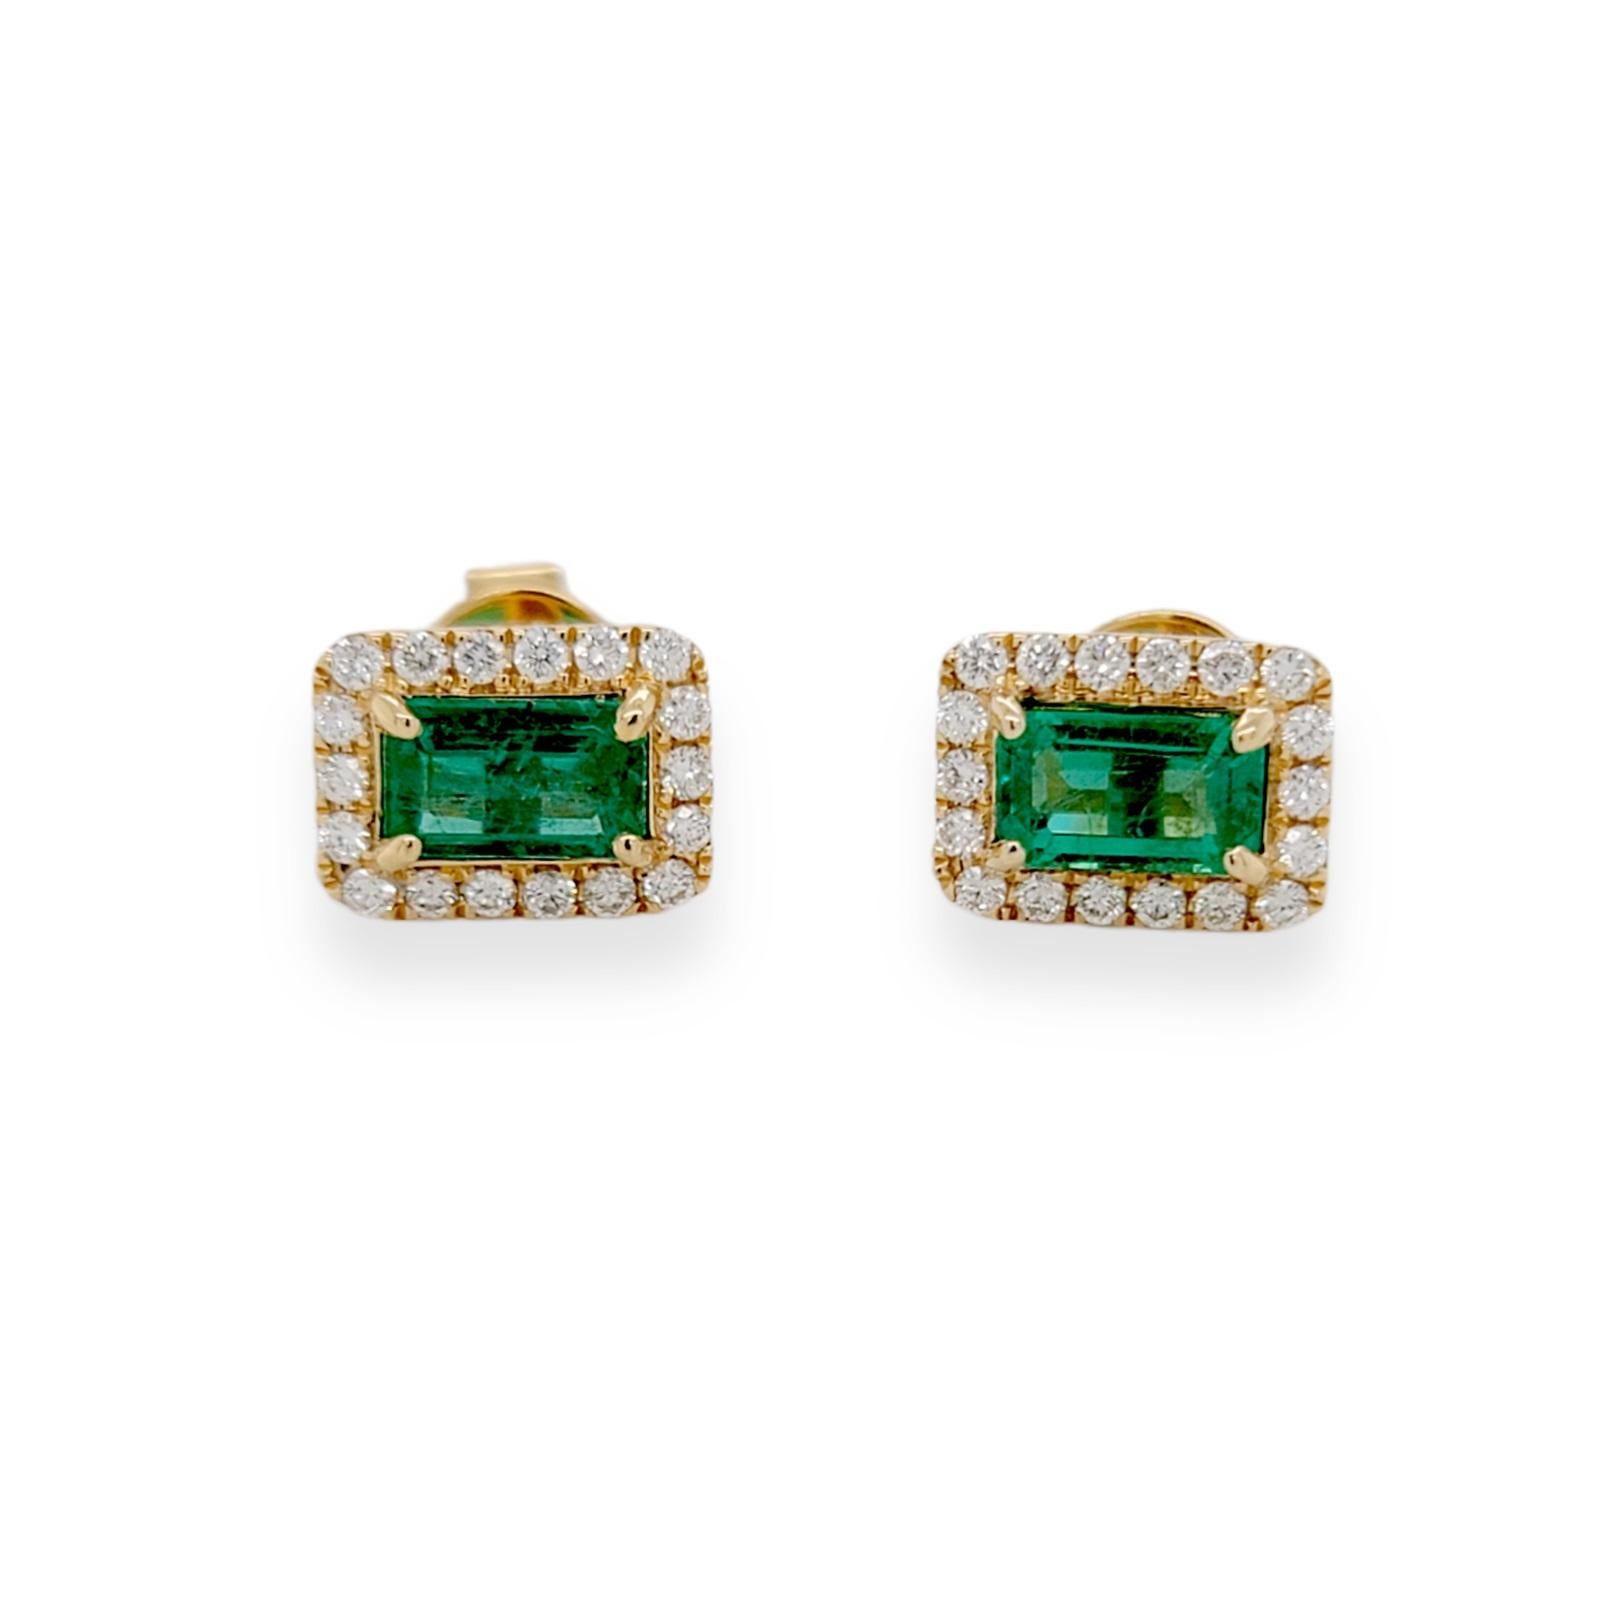 Round Cut 1.10 Ct Colombian Emerald & 0.30 Ct Diamonds in 14k Yellow Gold Stud Earrings For Sale